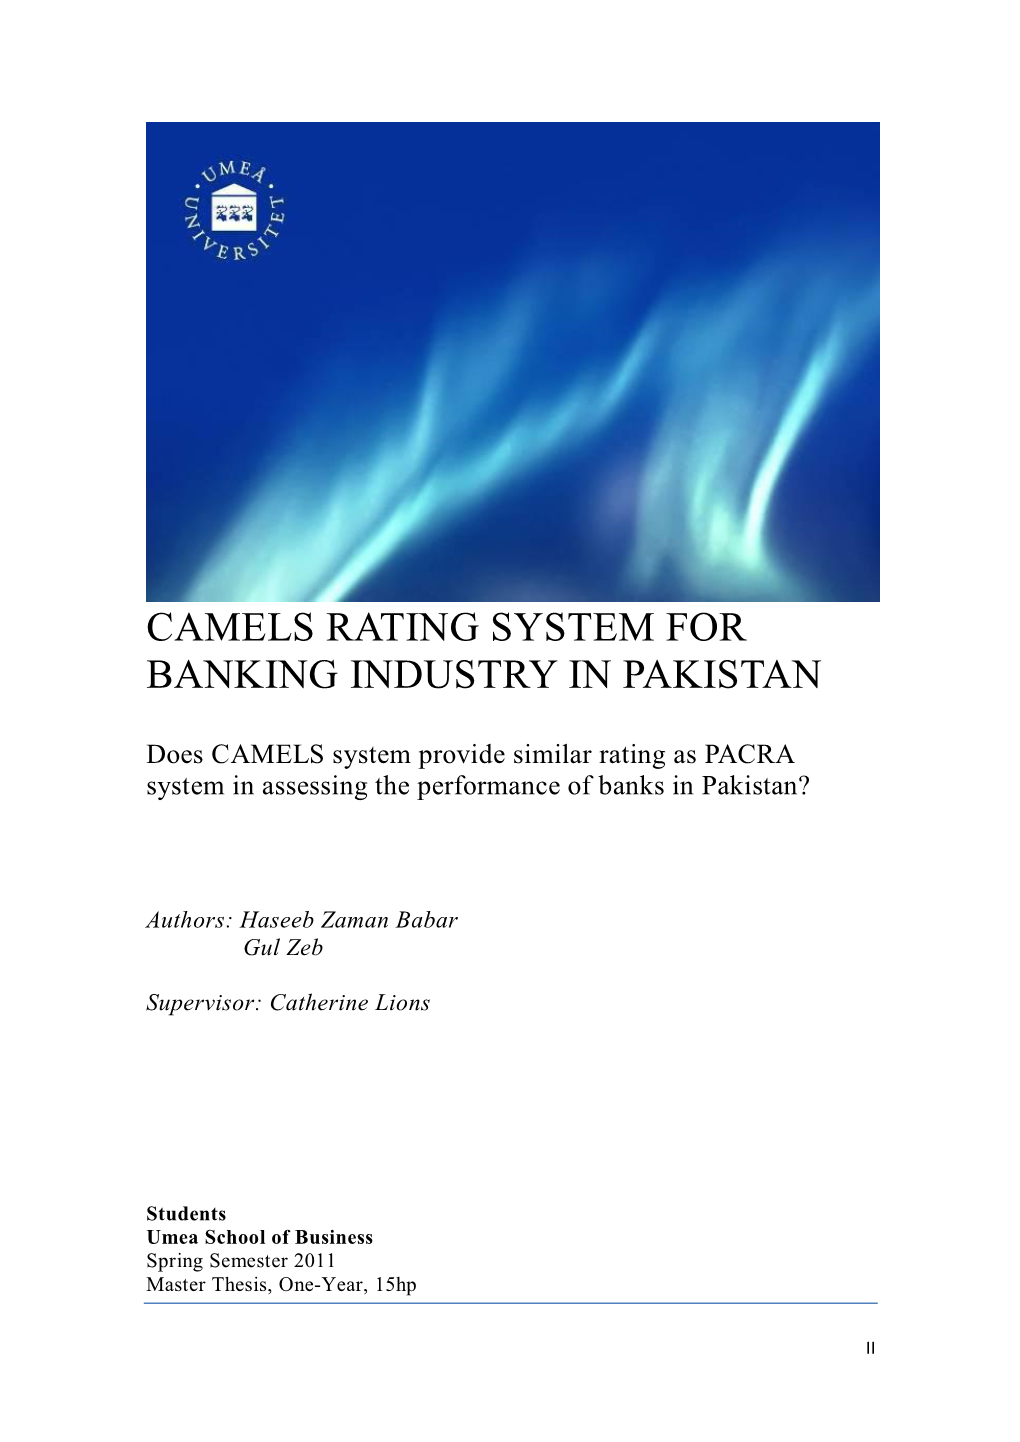 Camels Rating System for Banking Industry in Pakistan